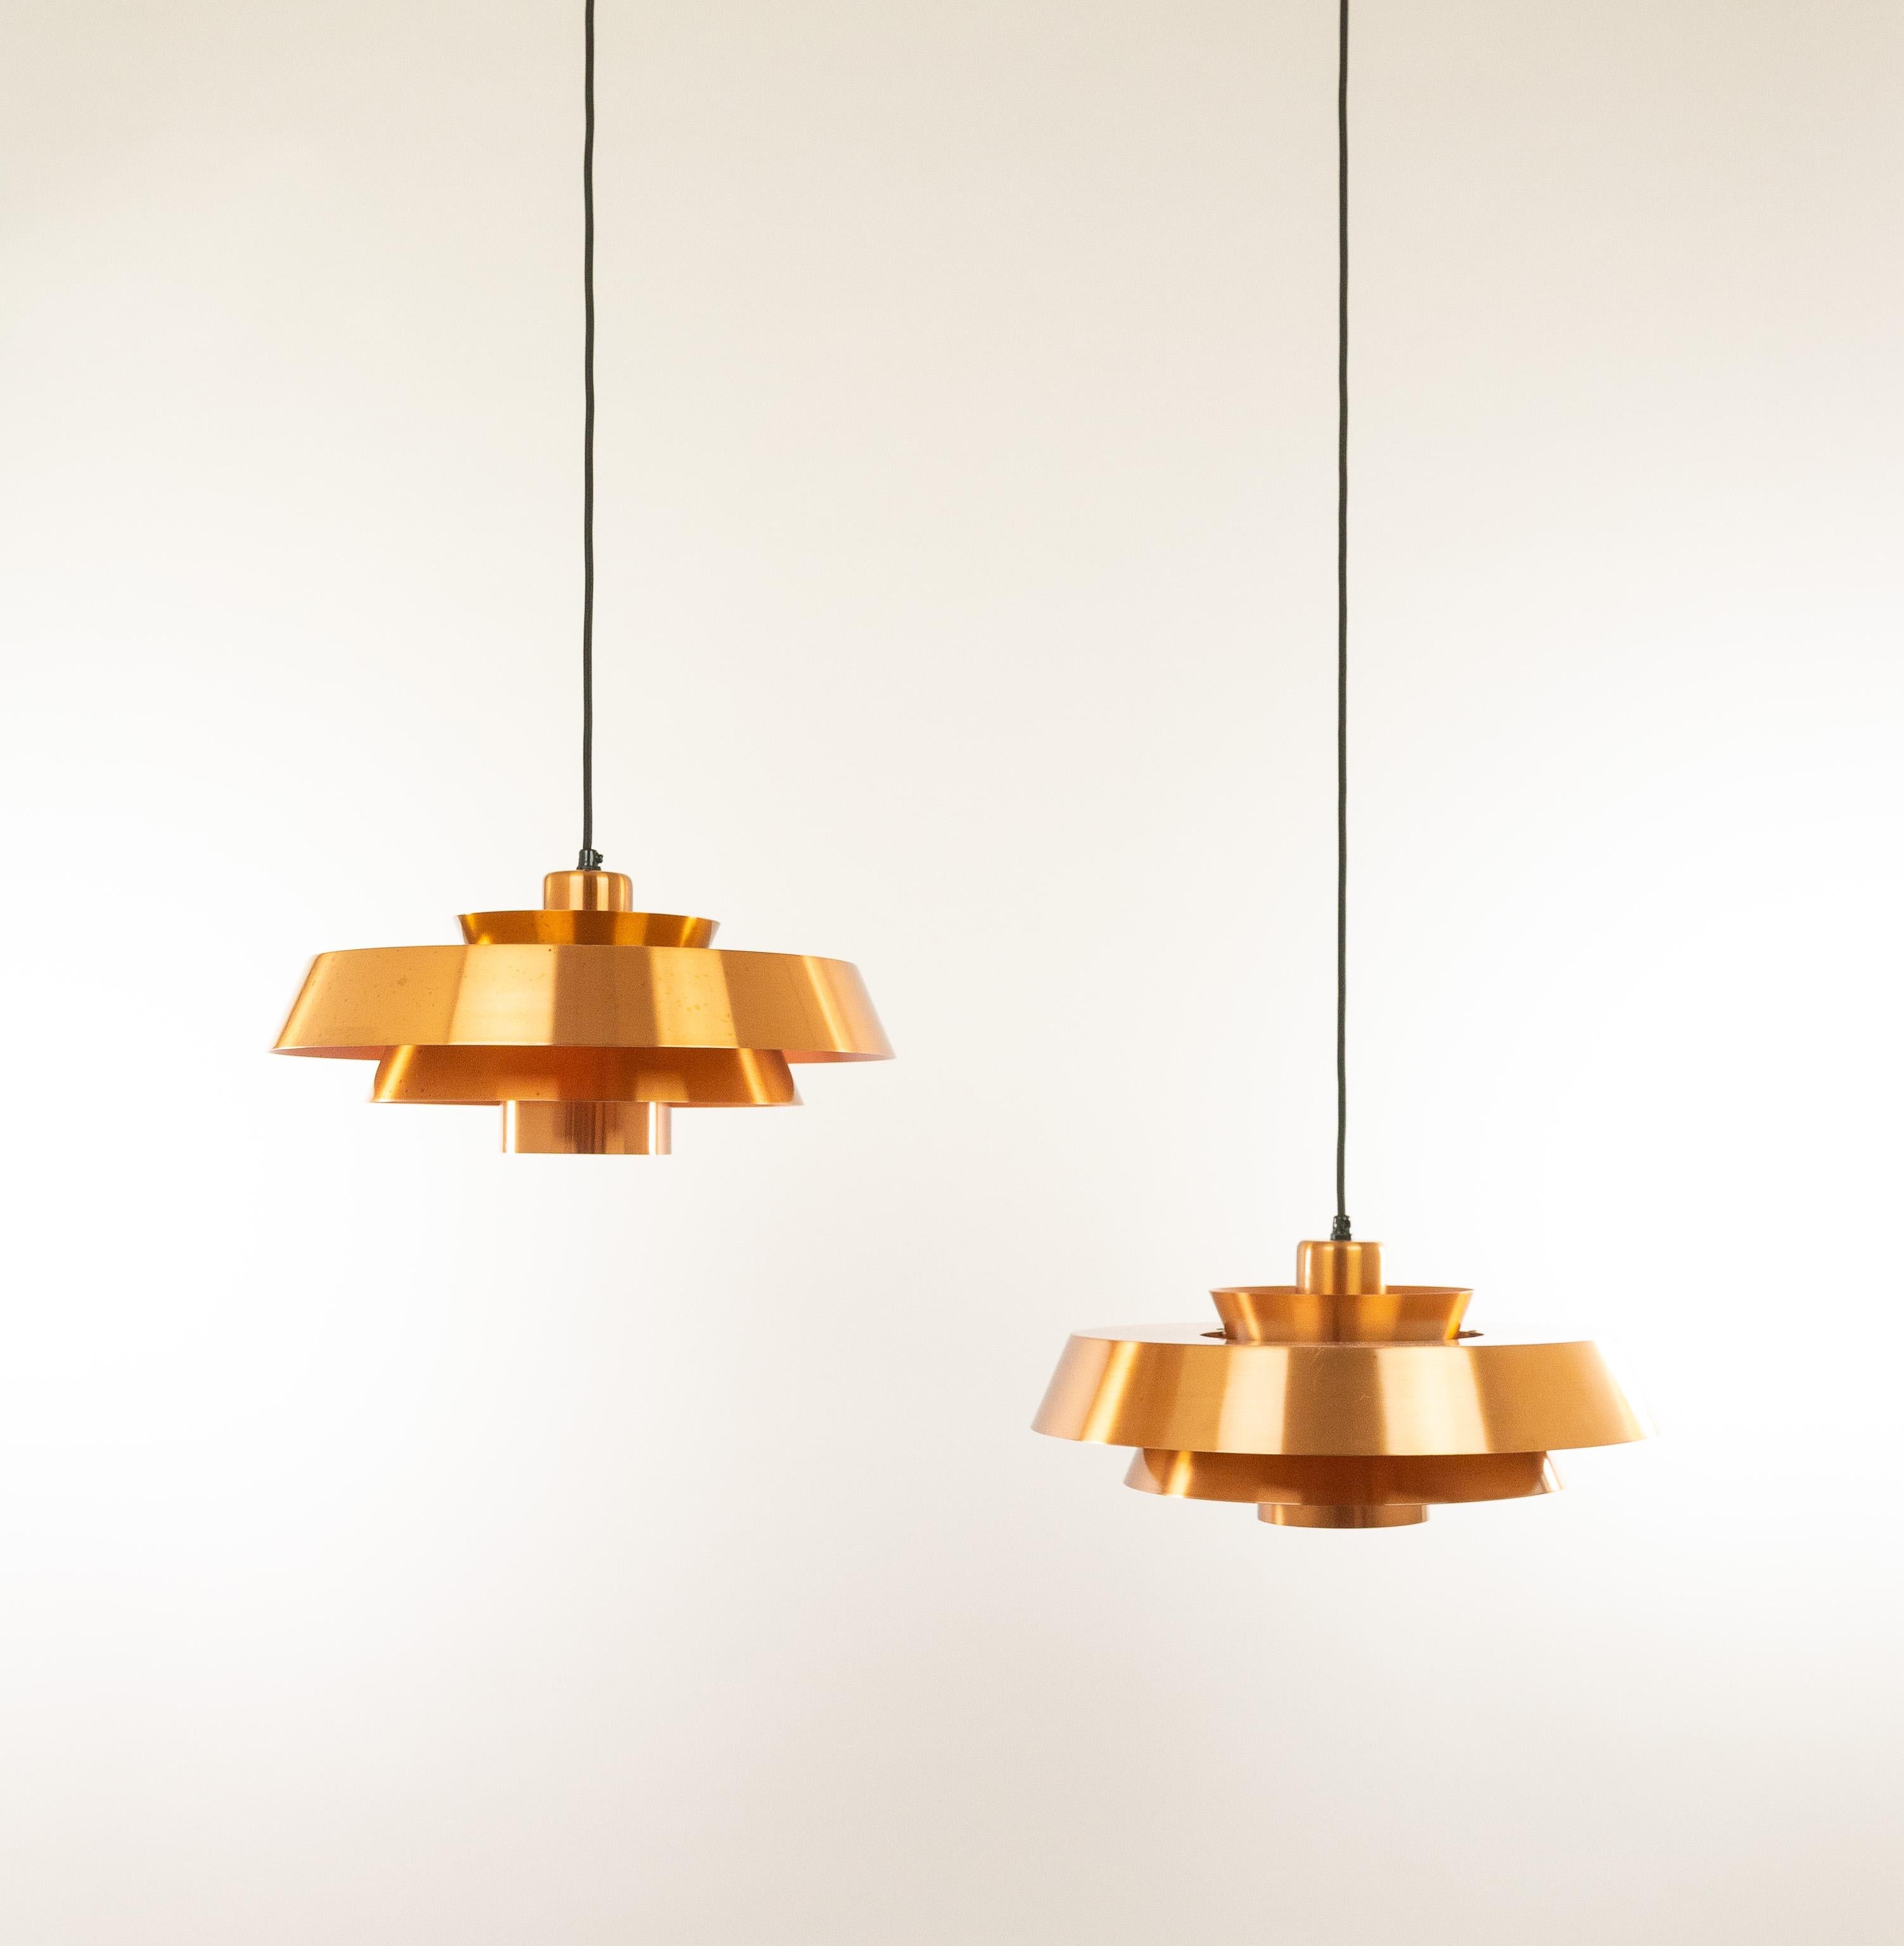 Pendant, model Nova, designed in the 1960s by Jo Hammerborg, main designer of Danish lighting manufacturer Fog & Mørup in the 1960s and 1970s.

This model was produced in three different metals: copper, brass and aluminium. This is the copper